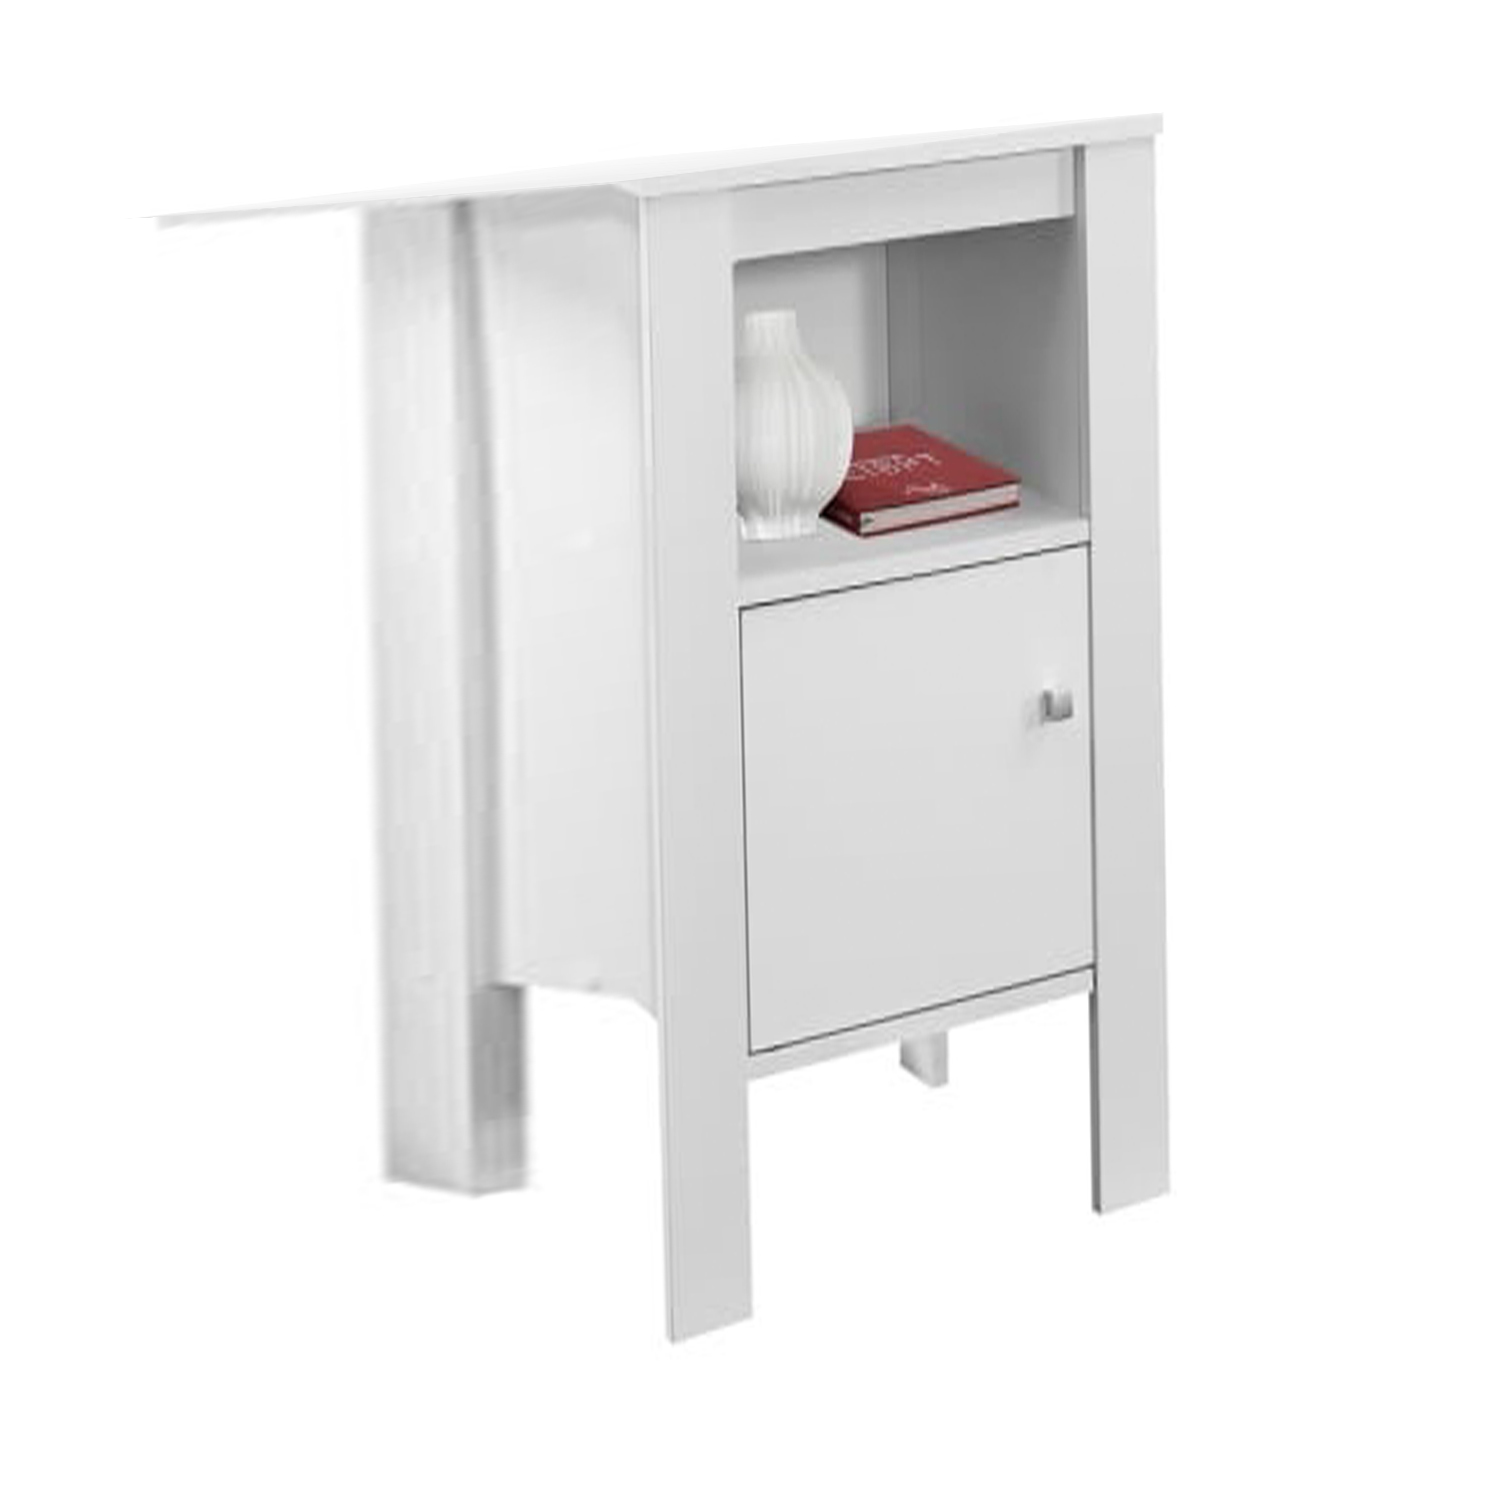 14" x 17.25" x 24.25" White Particle Board Storage Accent Table